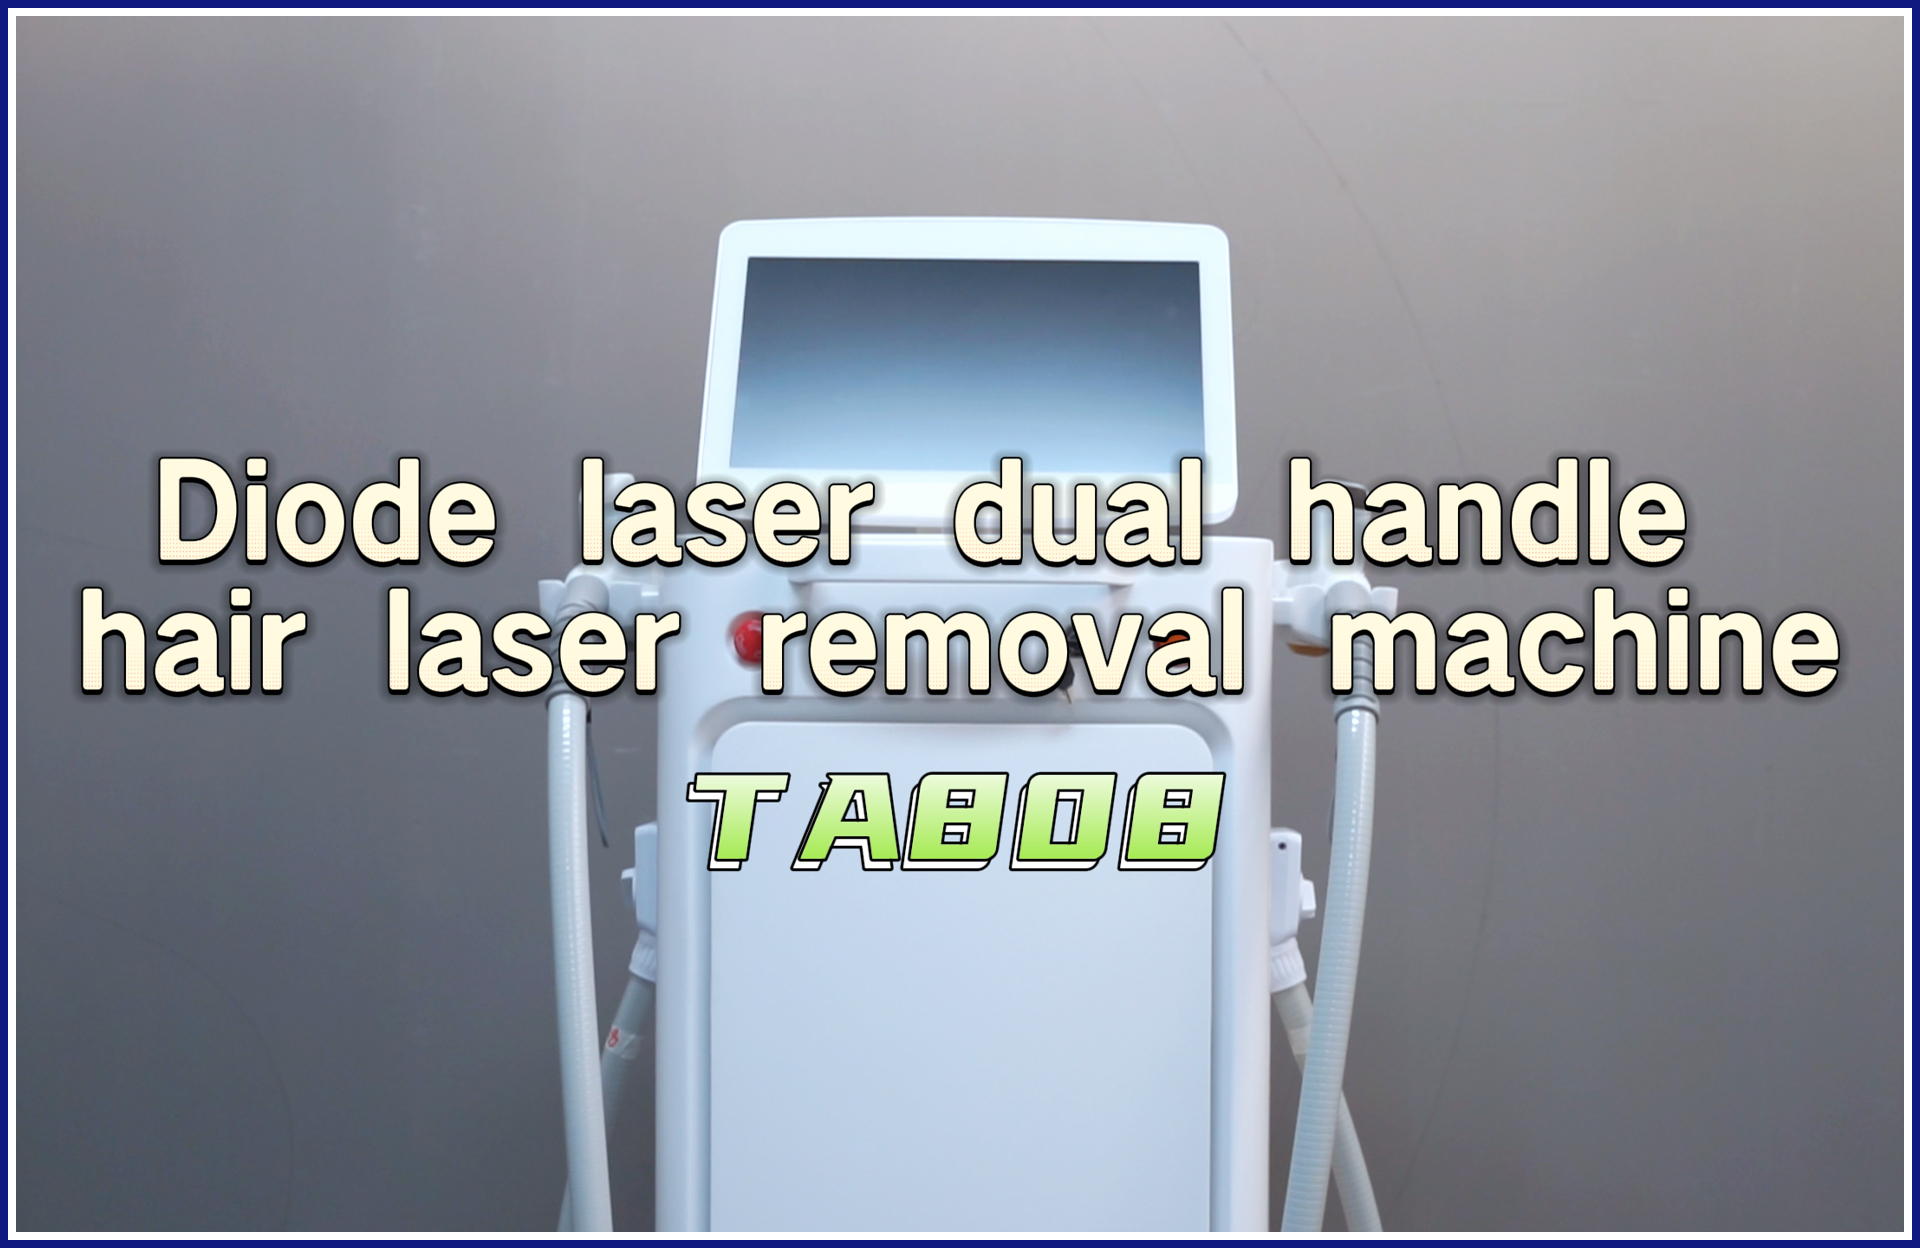 Finding the Best Laser Beauty Equipment | TITANs2K Laser Hair Removal Machine